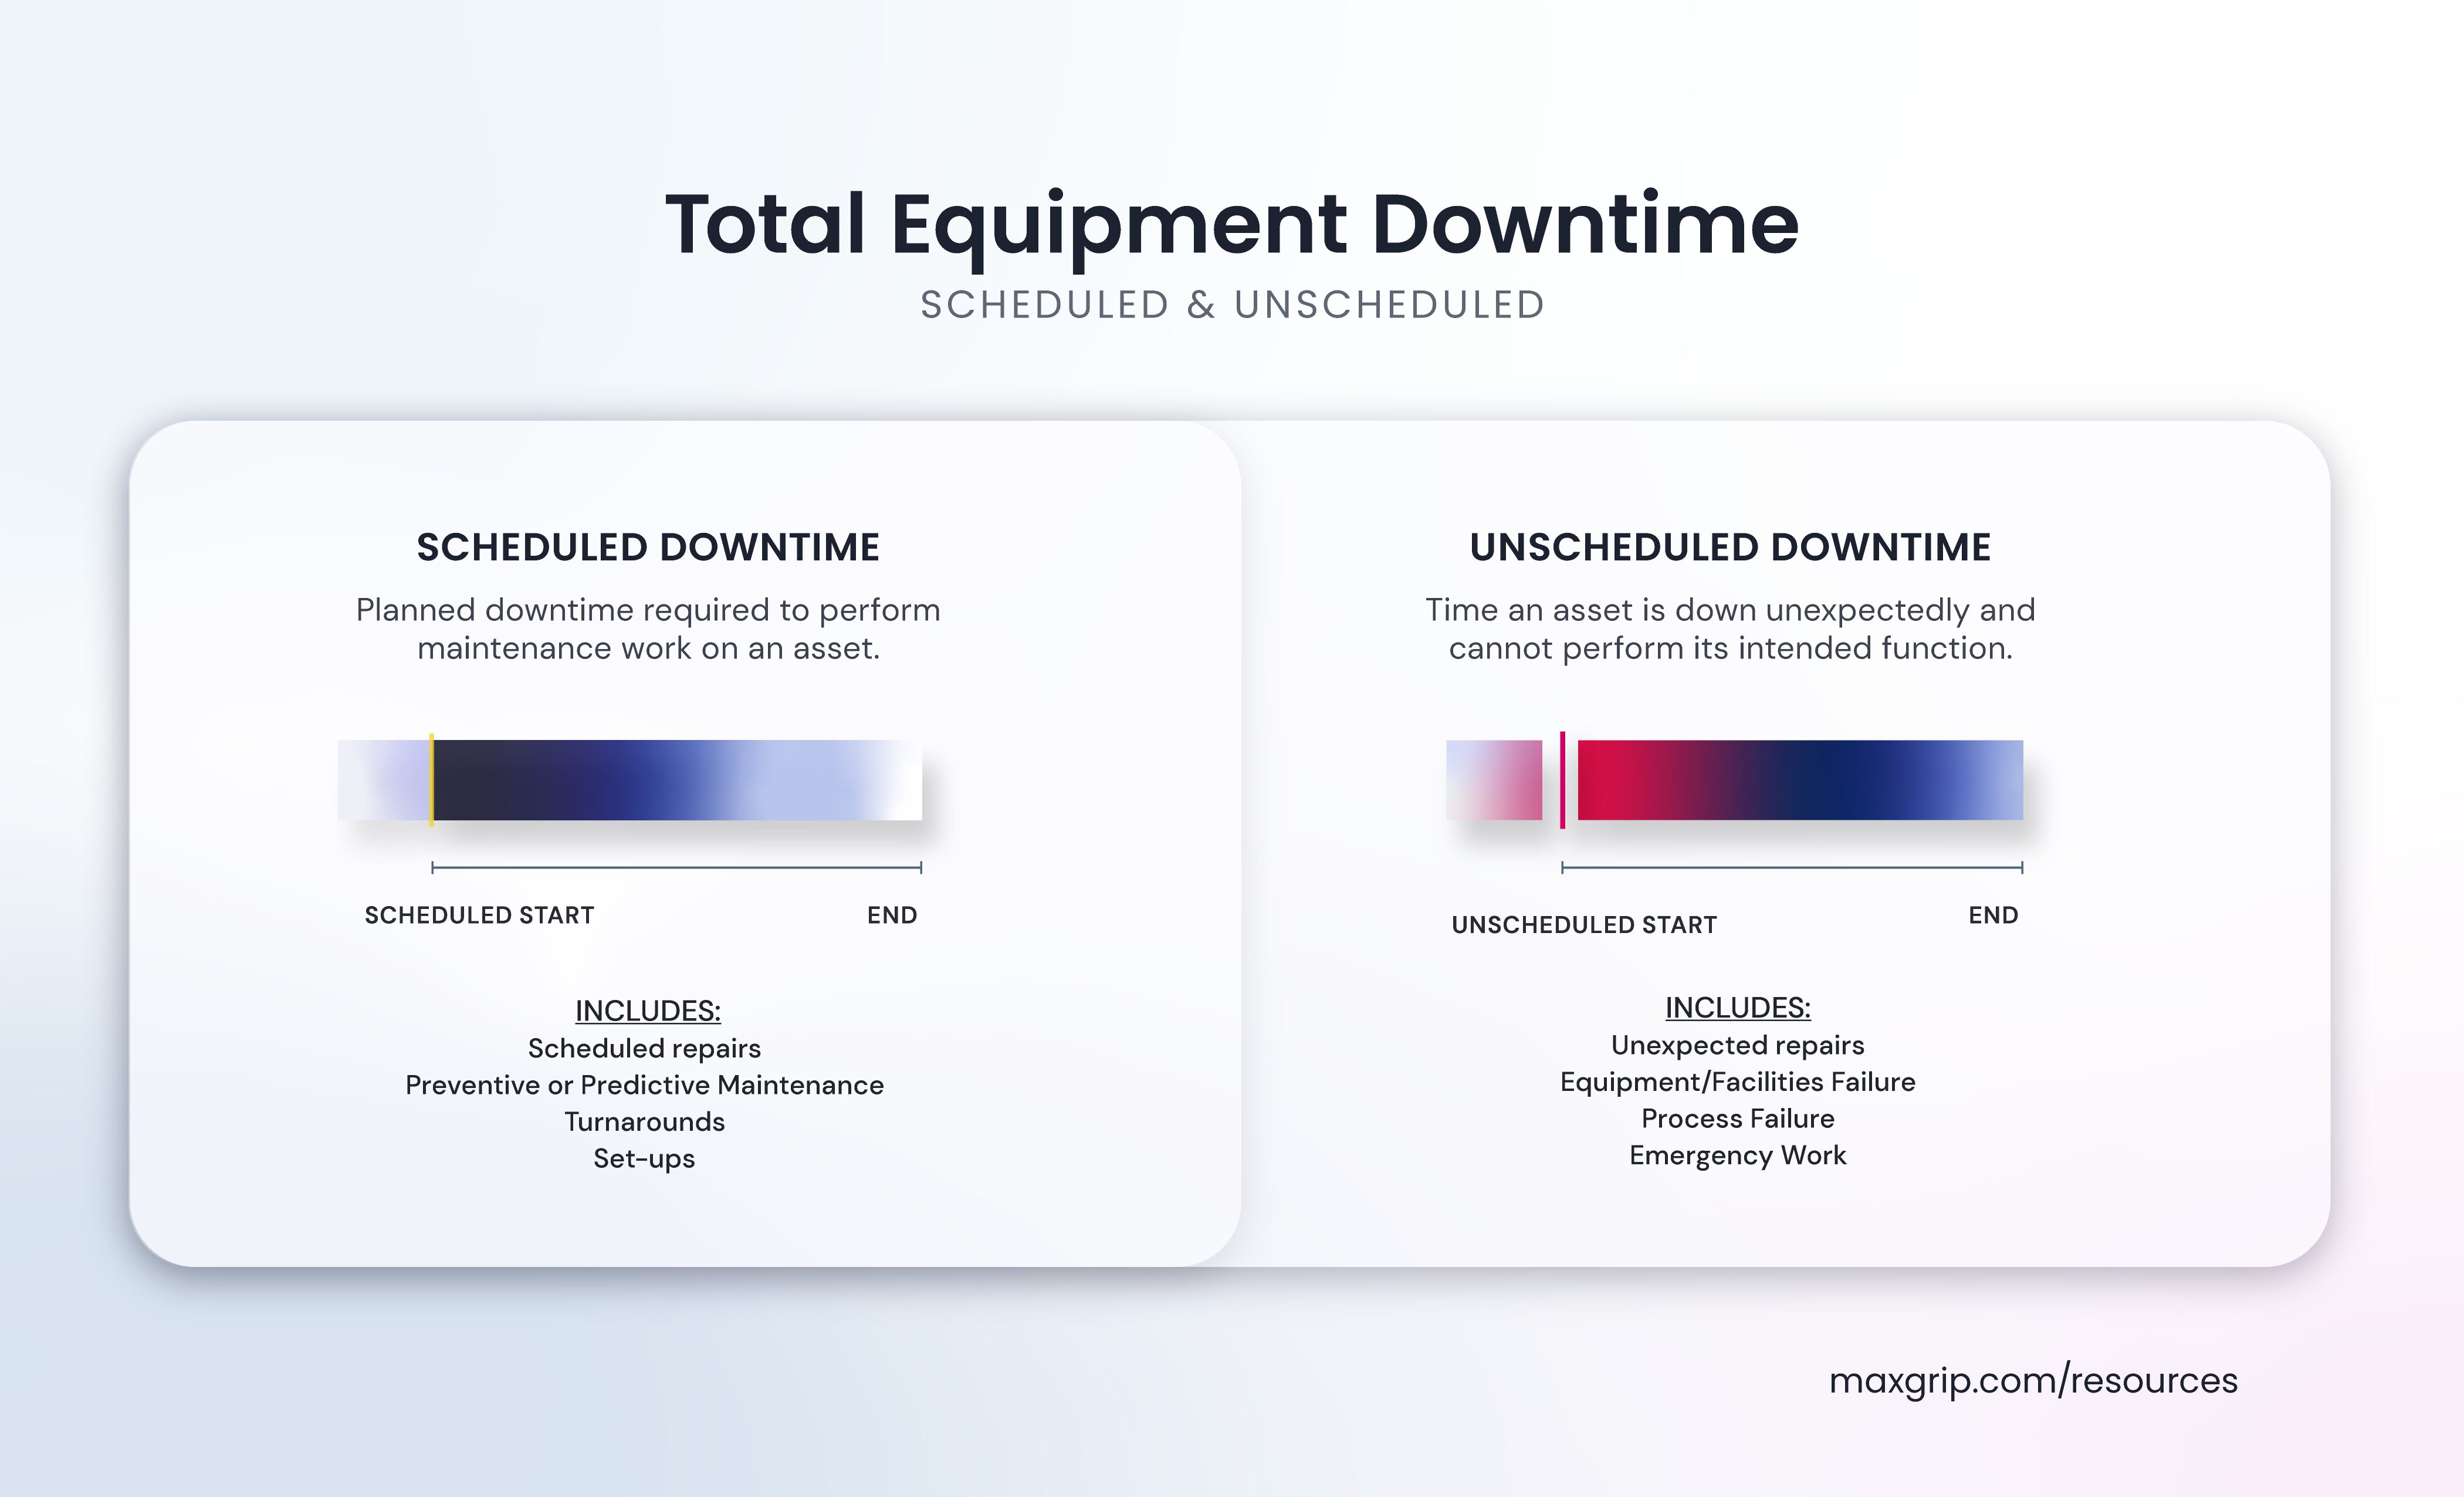 Total Equipment Downtime - a comparison of scheduled and unscheduled downtime